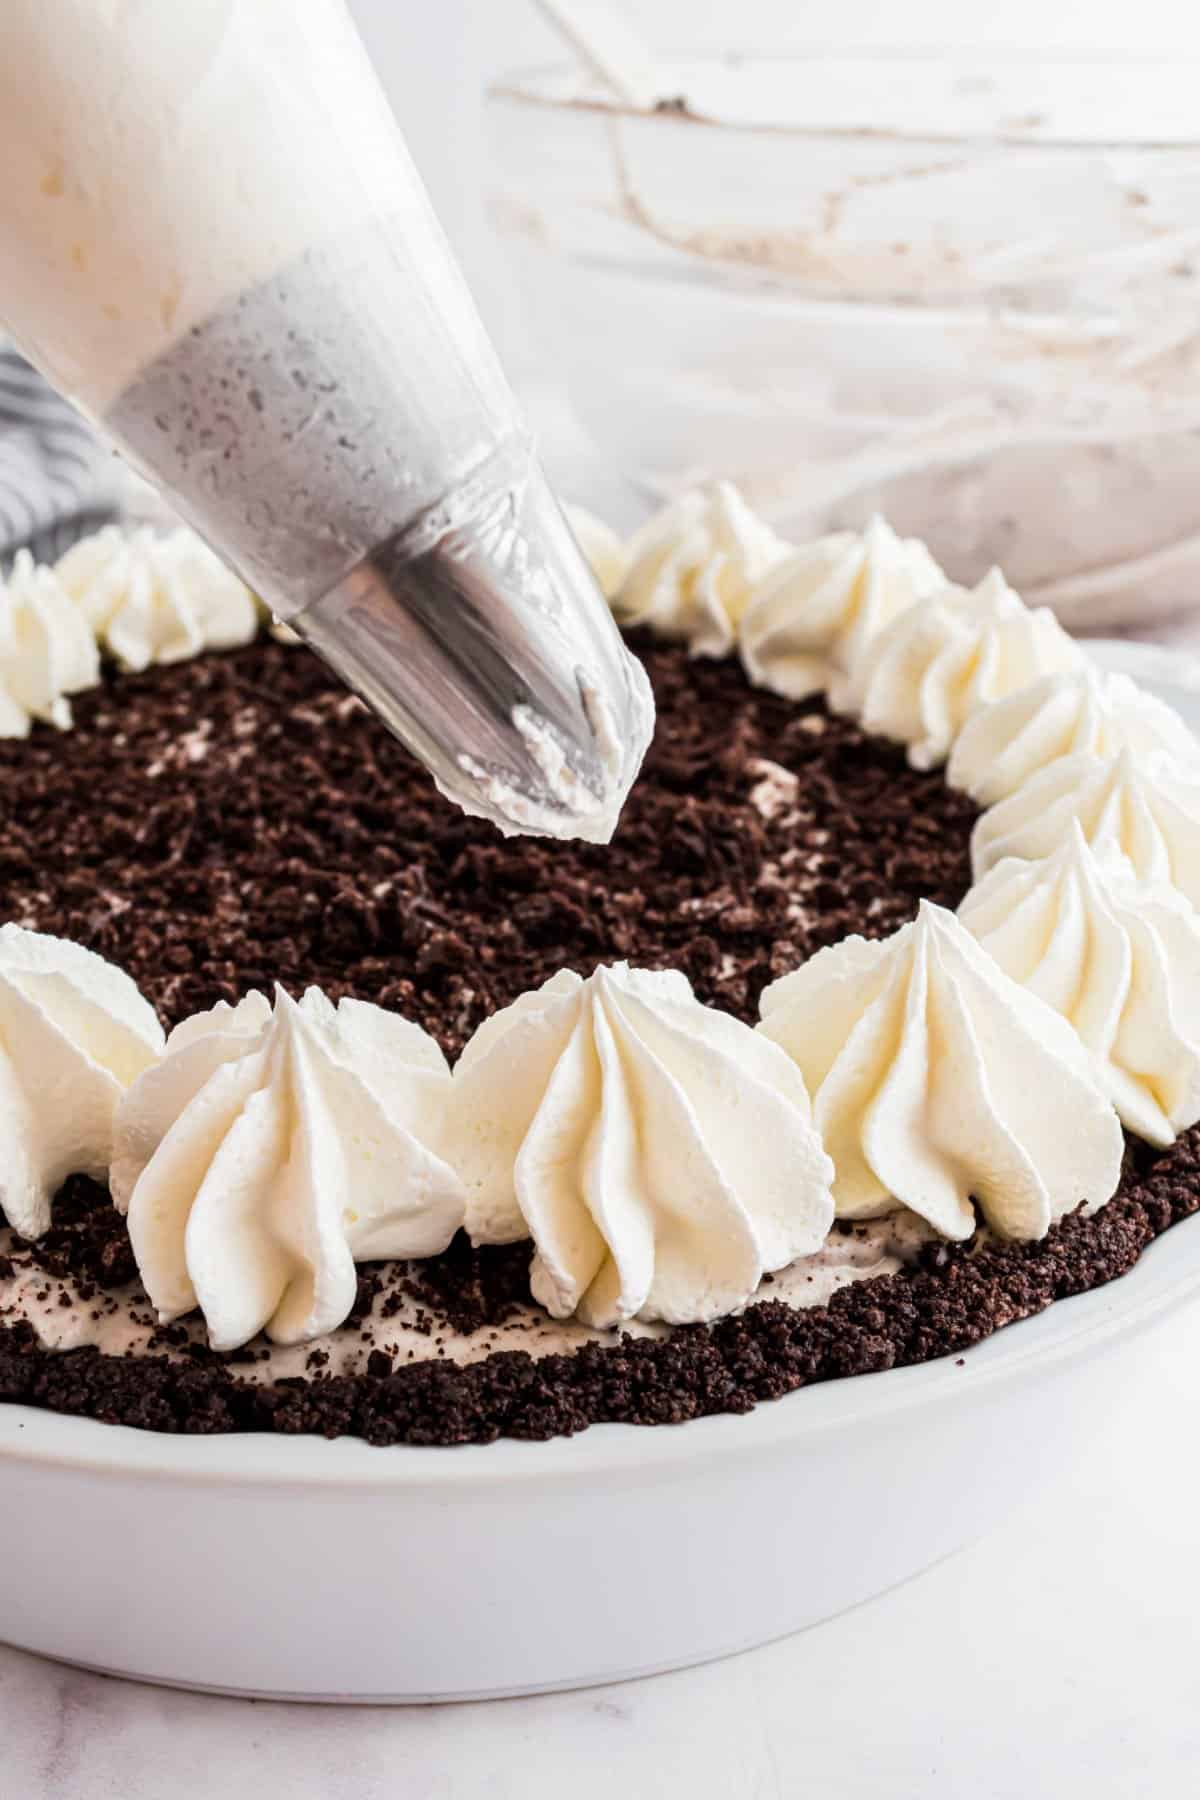 Stabilized whipped cream piped onto an oreo cheesecake.